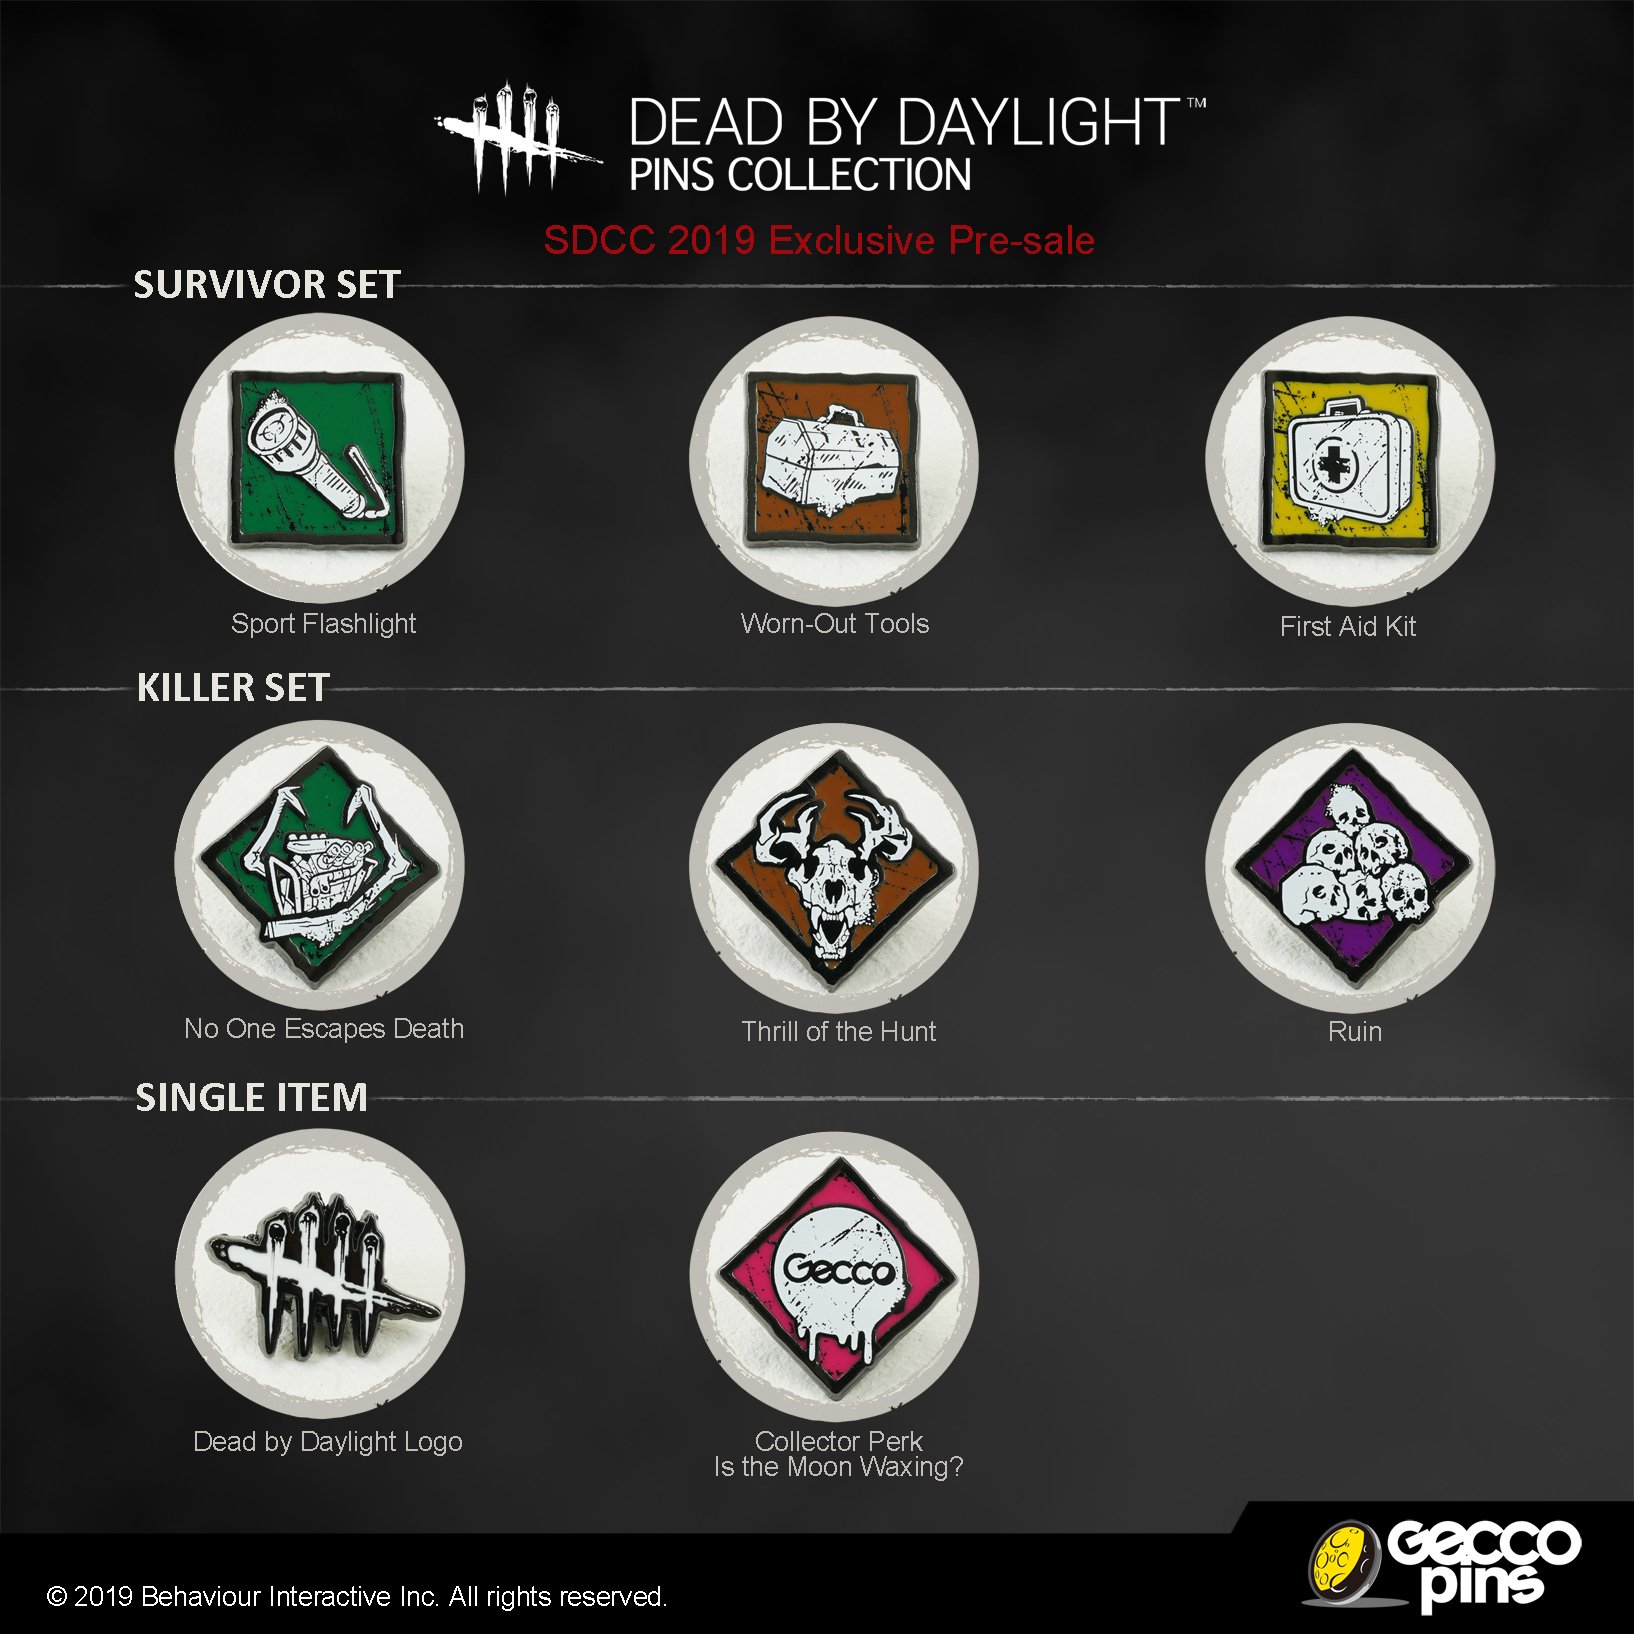 Gecco Corp We Are Launching A Pin Collection From The Asymmetrical Multiplayer Horror Game Dead By Daylight Ahead Of The Public Release We Ll Offer Some From The Lineup At Sdcc